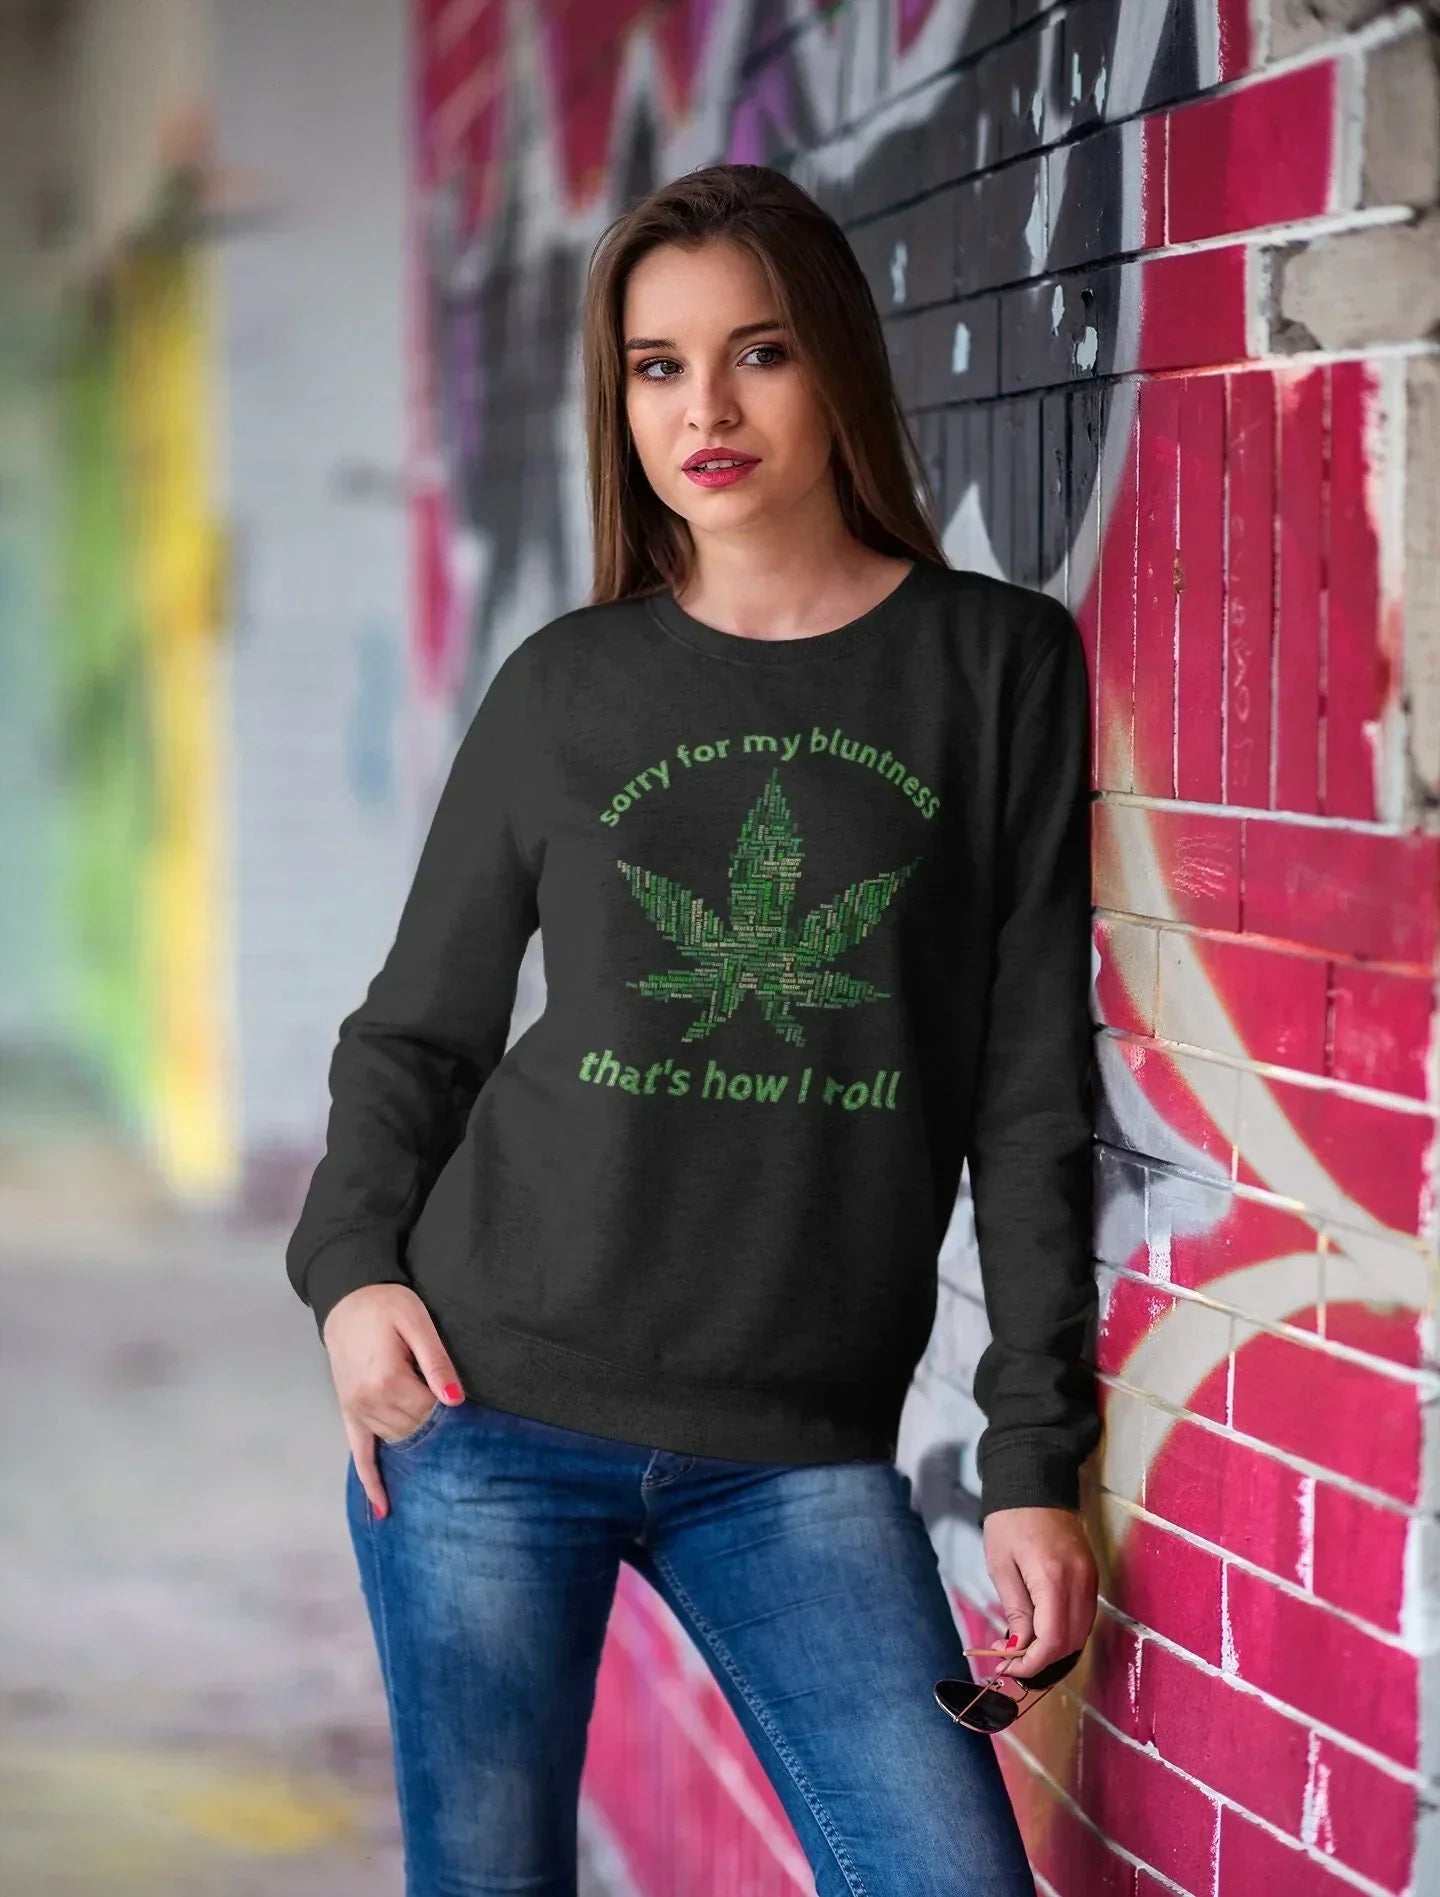 Stoner Gifts, Hippie Clothes, Weed Gifts, 420 Gift Bluntness Stoner Girl  Shirt, Stoner Gift for Him, Stoner Gift for Her, Marijuana T shirts